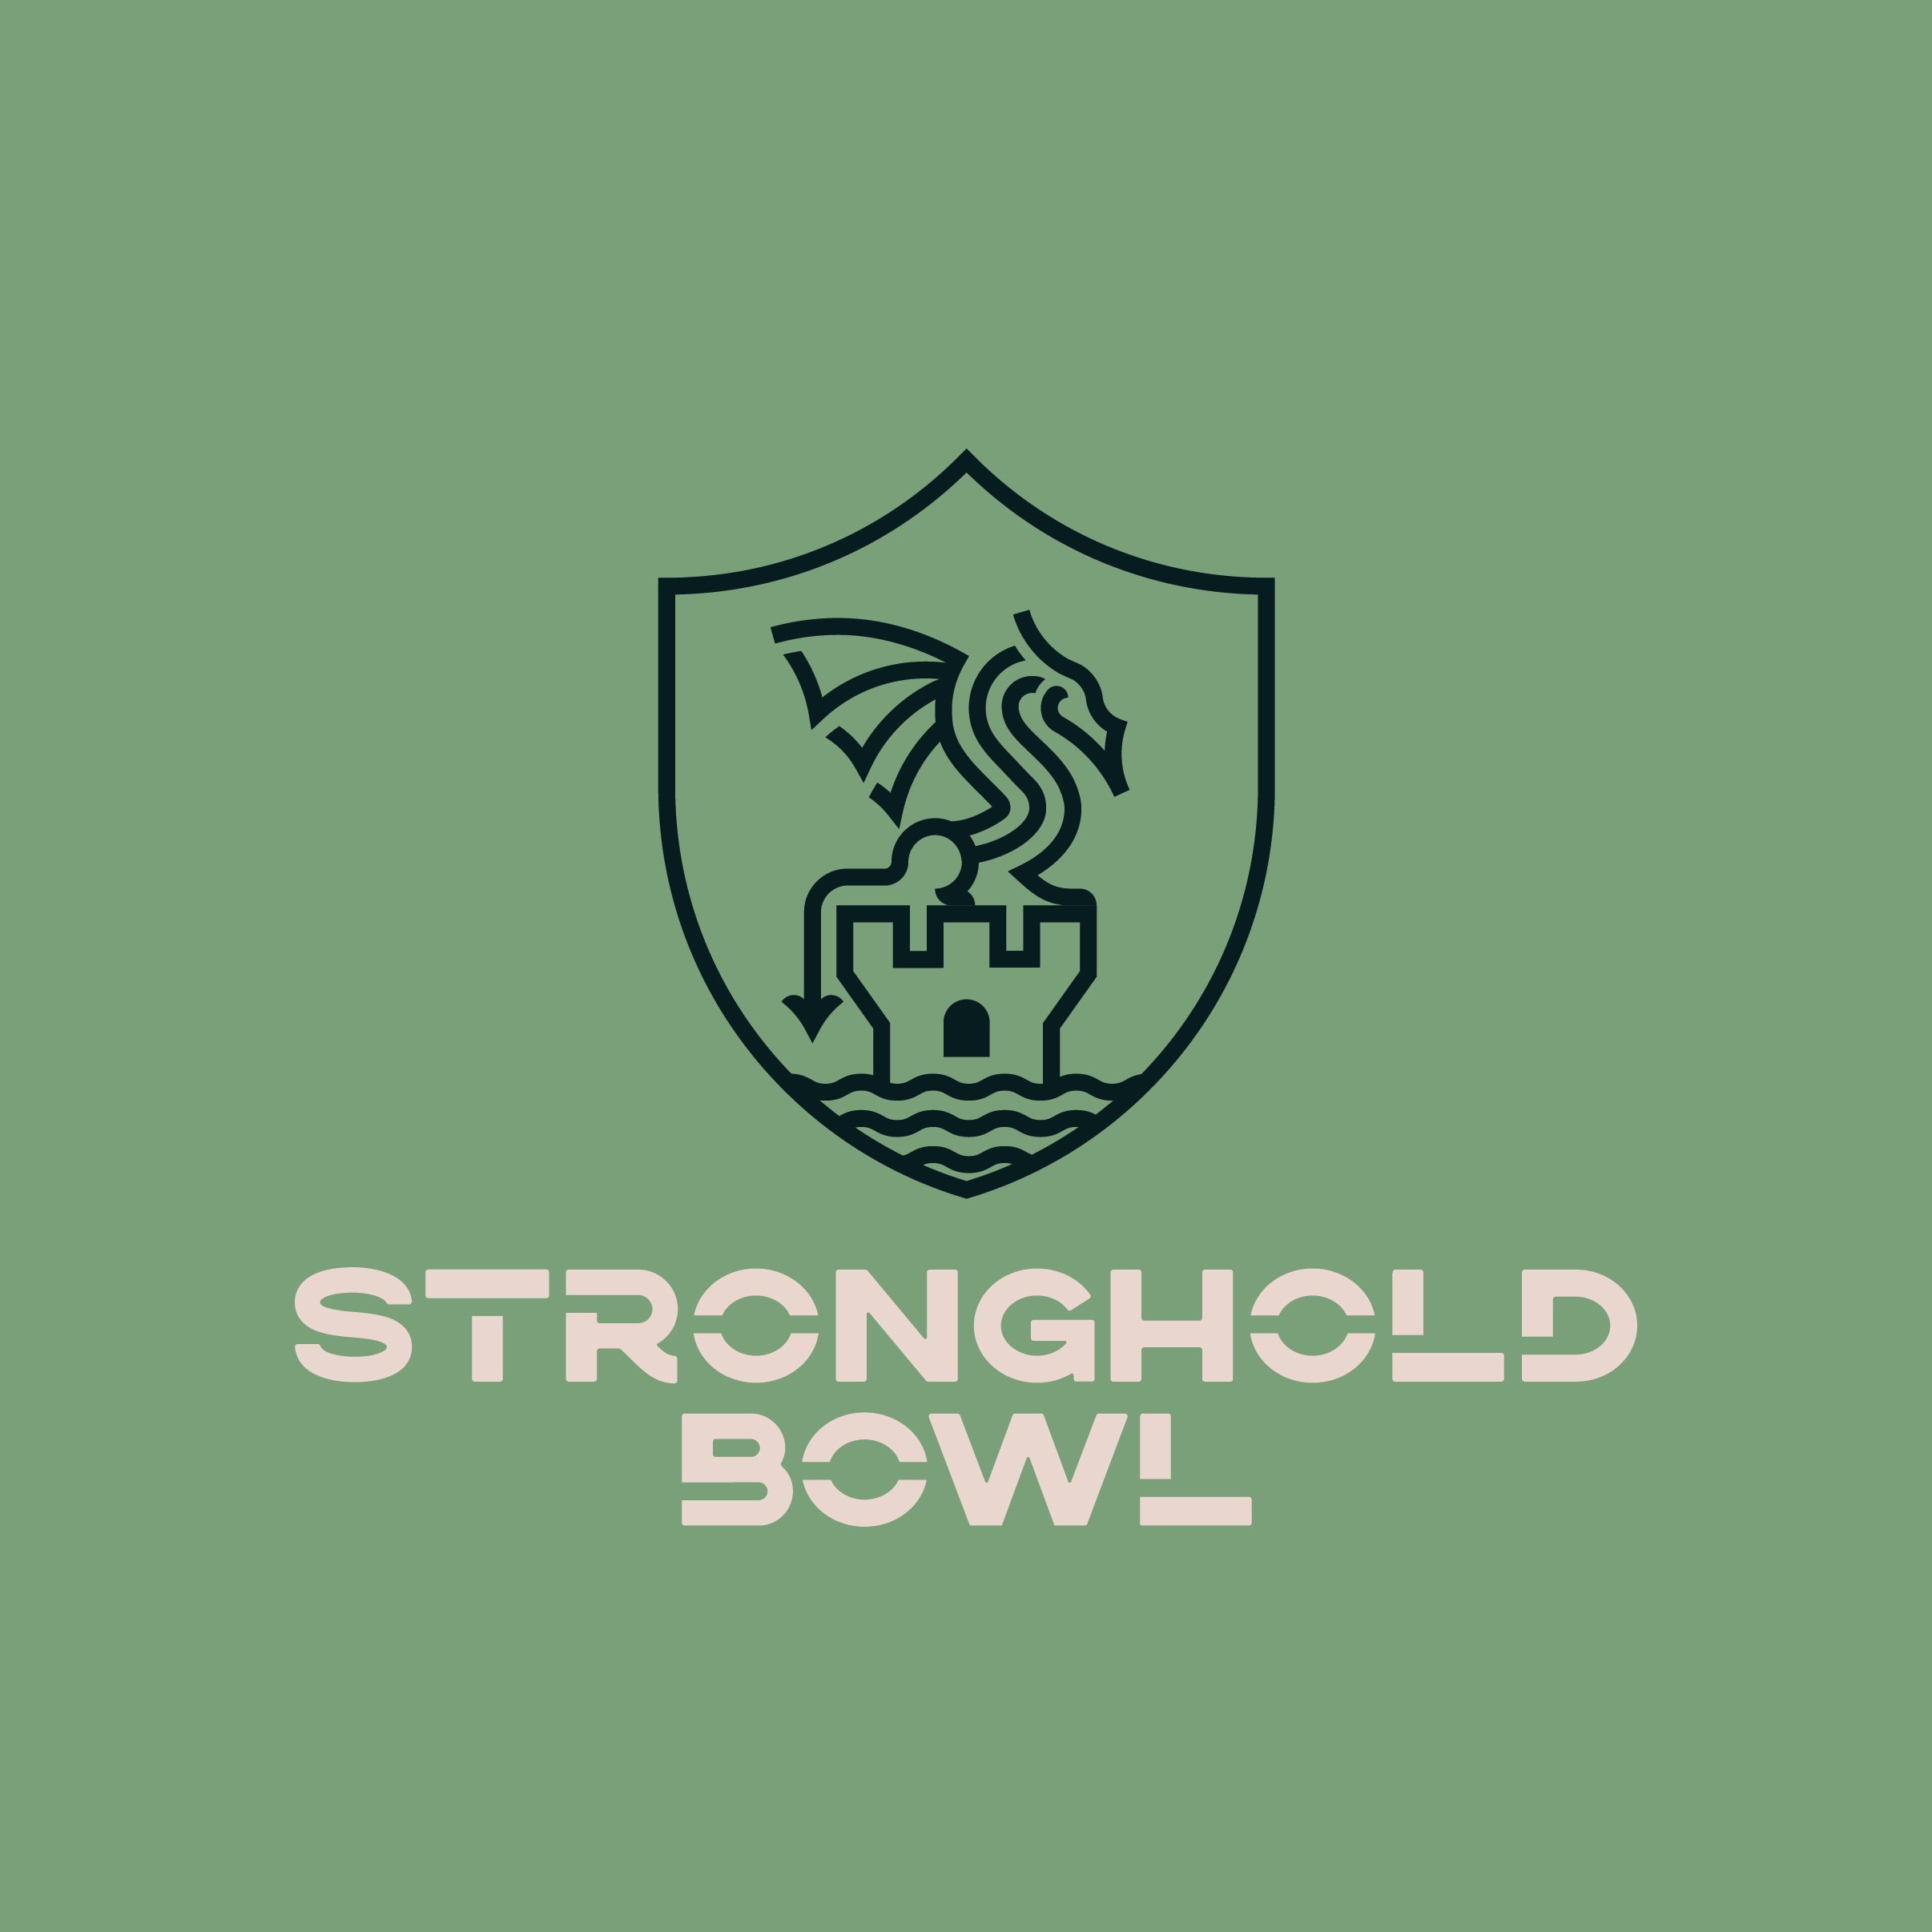 Stronghold bowl is taking place in Ljubljana